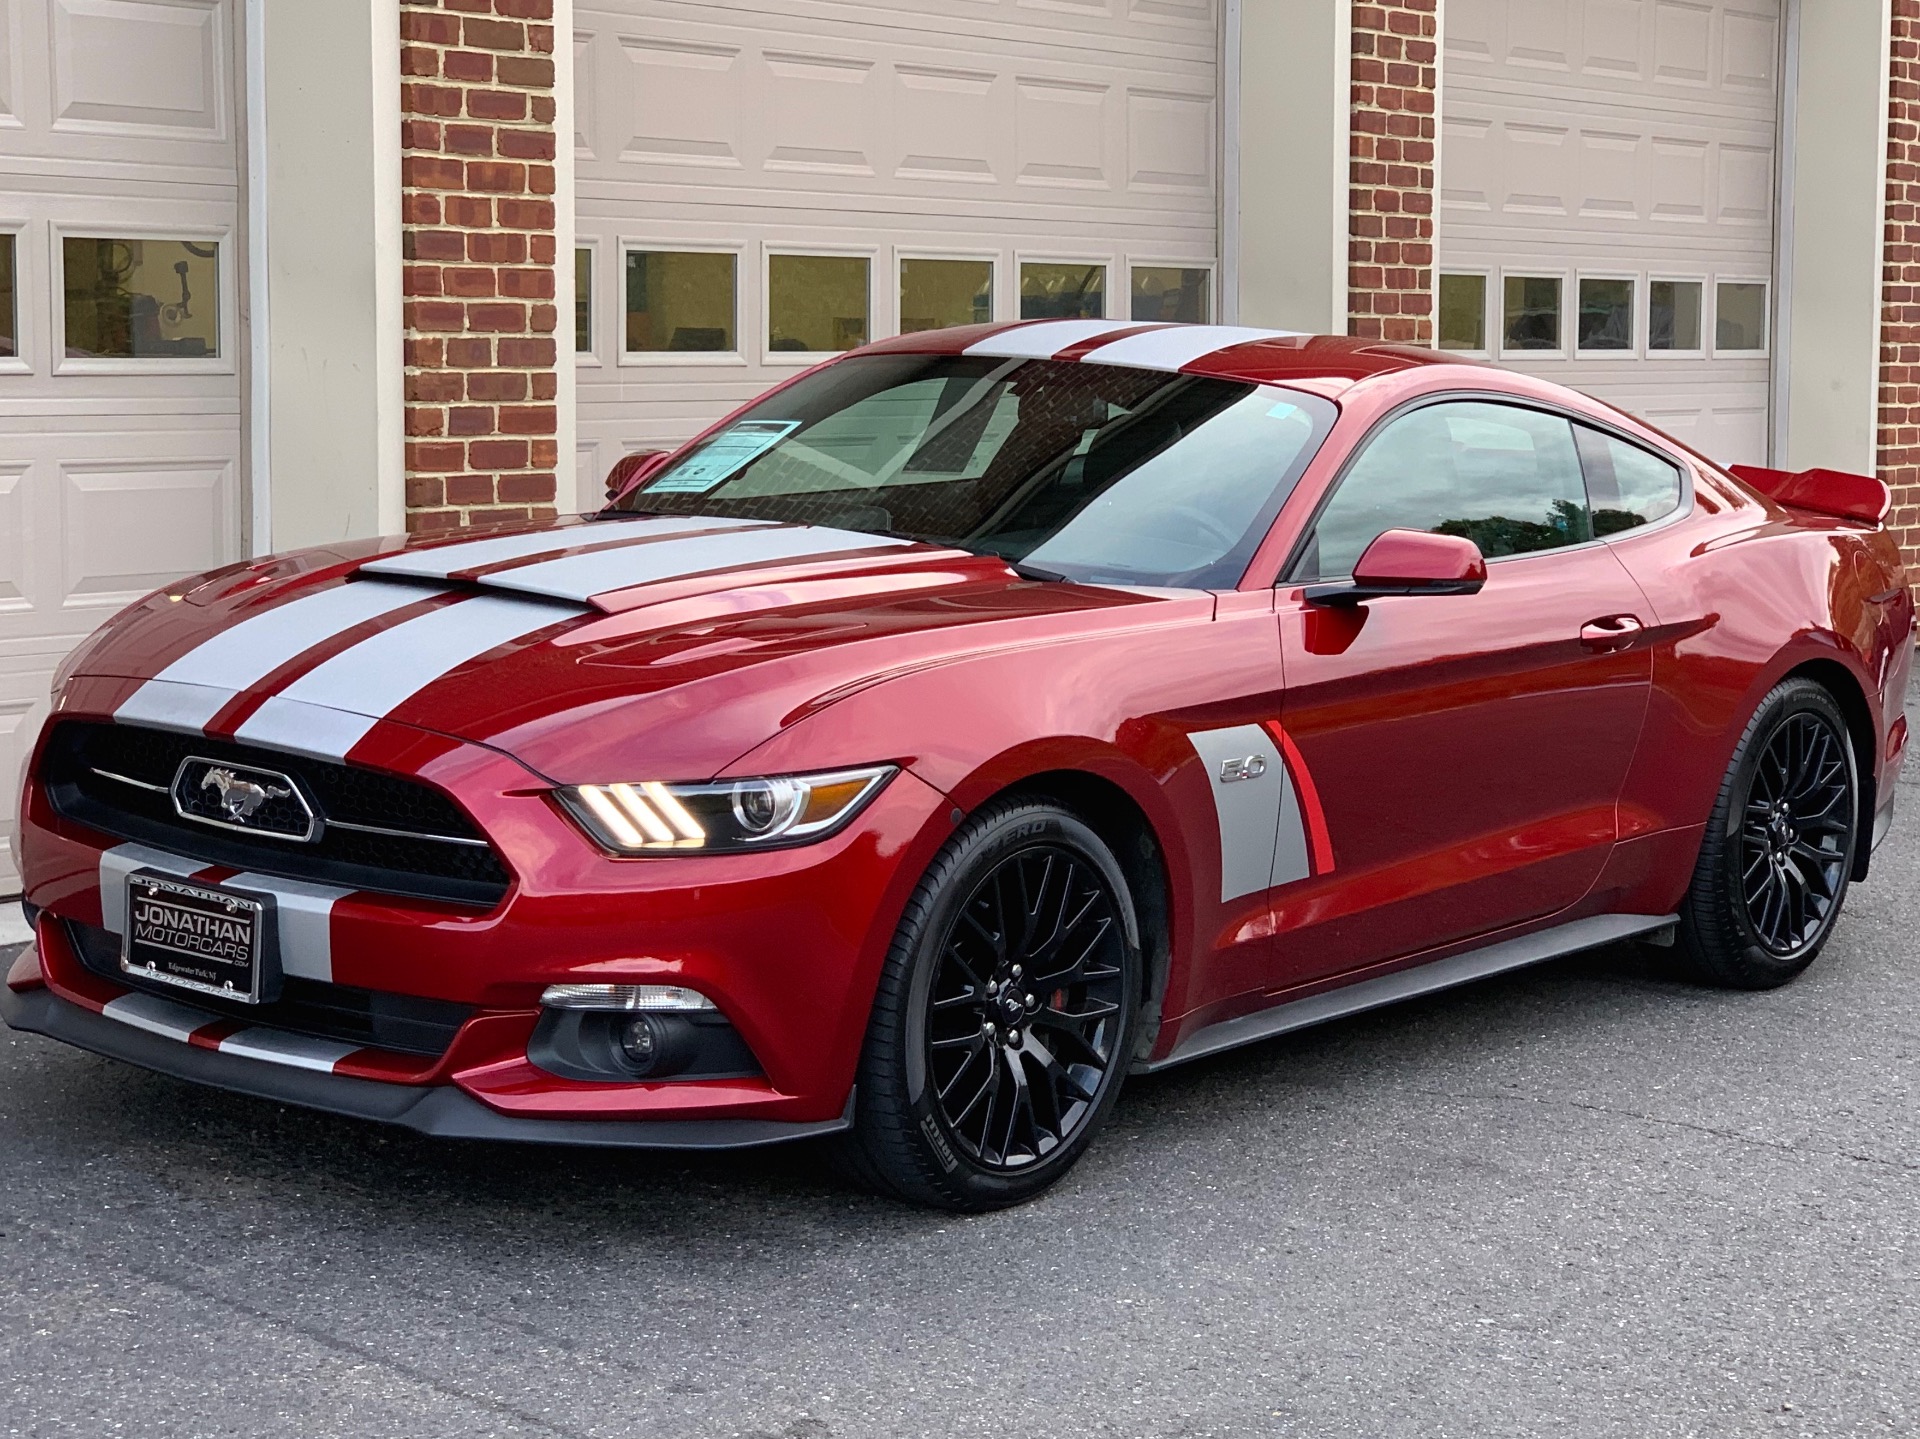 2015 Ford Mustang Gt Premium 50th Anniversary Performance Package Stock 304526 For Sale Near